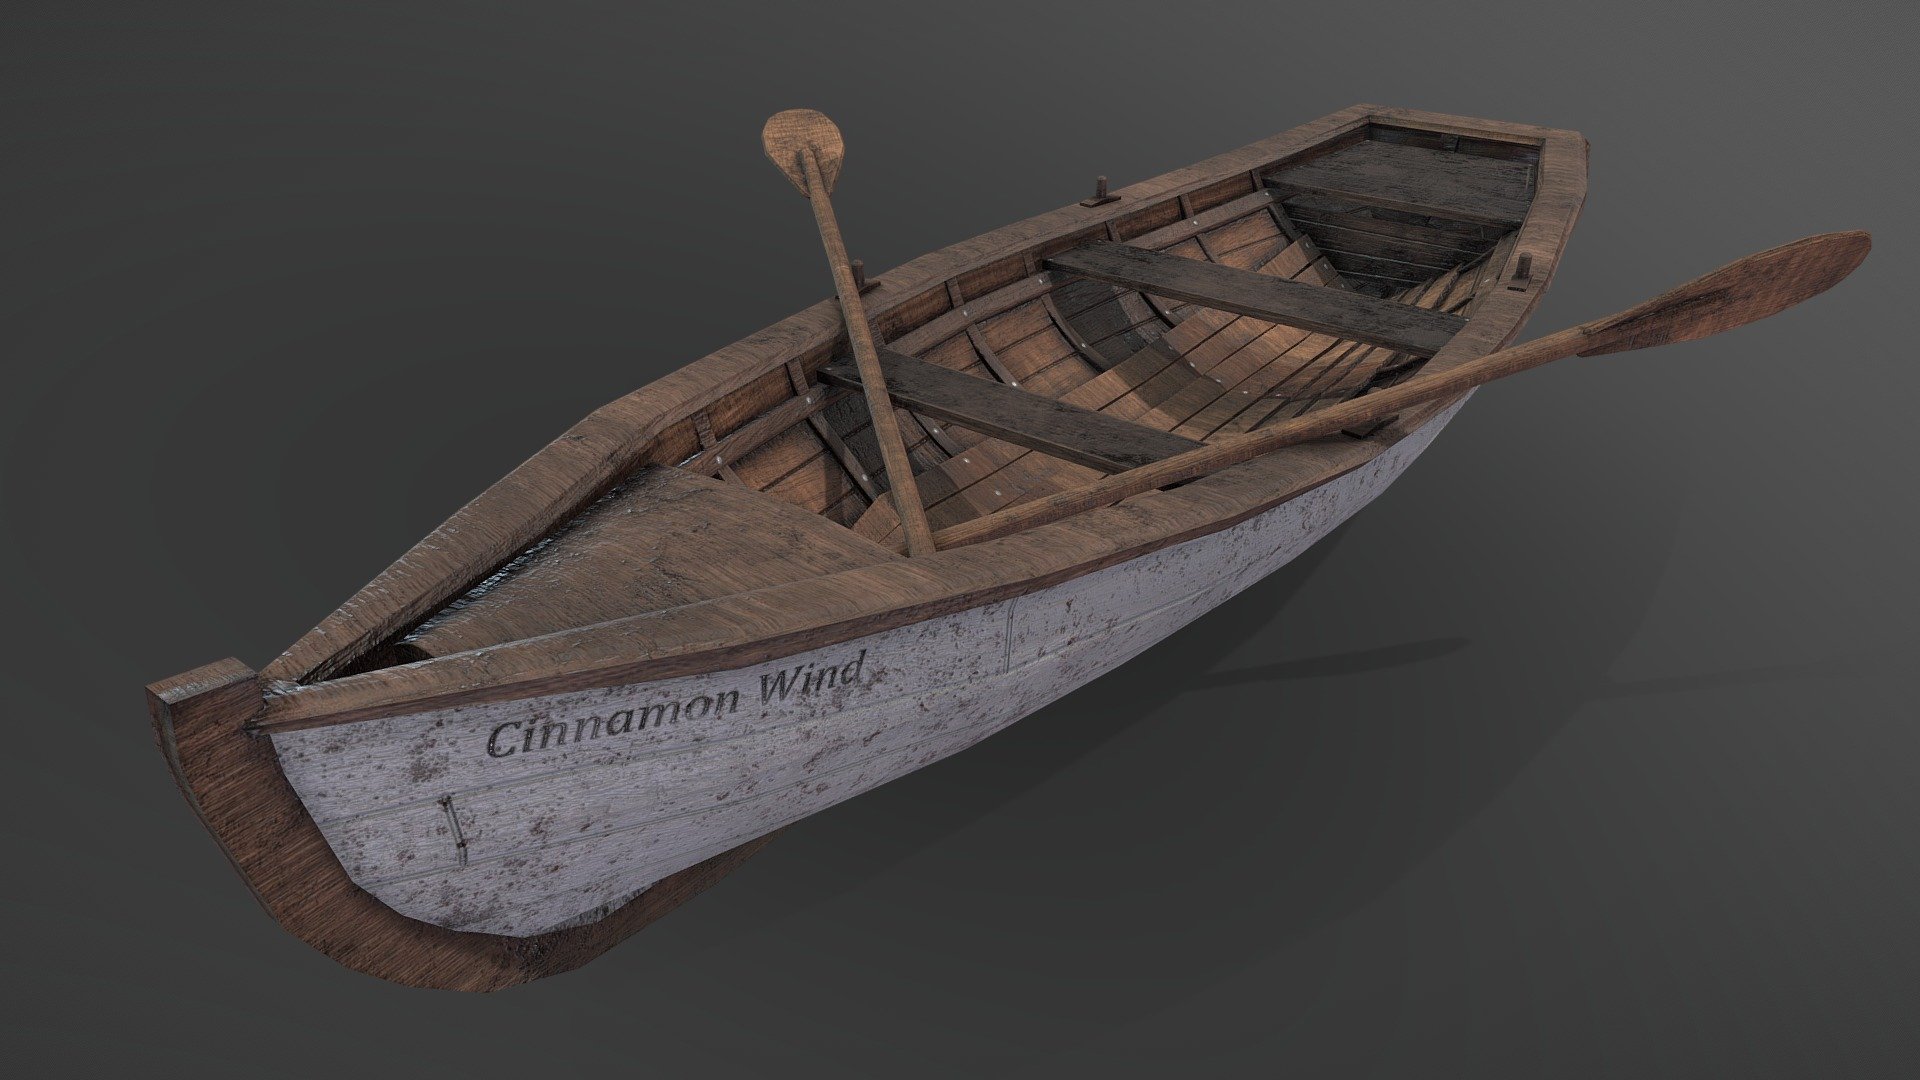 A rowing boat loosely based of the previous generation of lifeboats employed by the RNLI
Optimzed for game use

check out renders on artstation:
https://www.artstation.com/artwork/4bzN1n - Rowing Boat - Download Free 3D model by J.J.West (@jw202471) 3d model